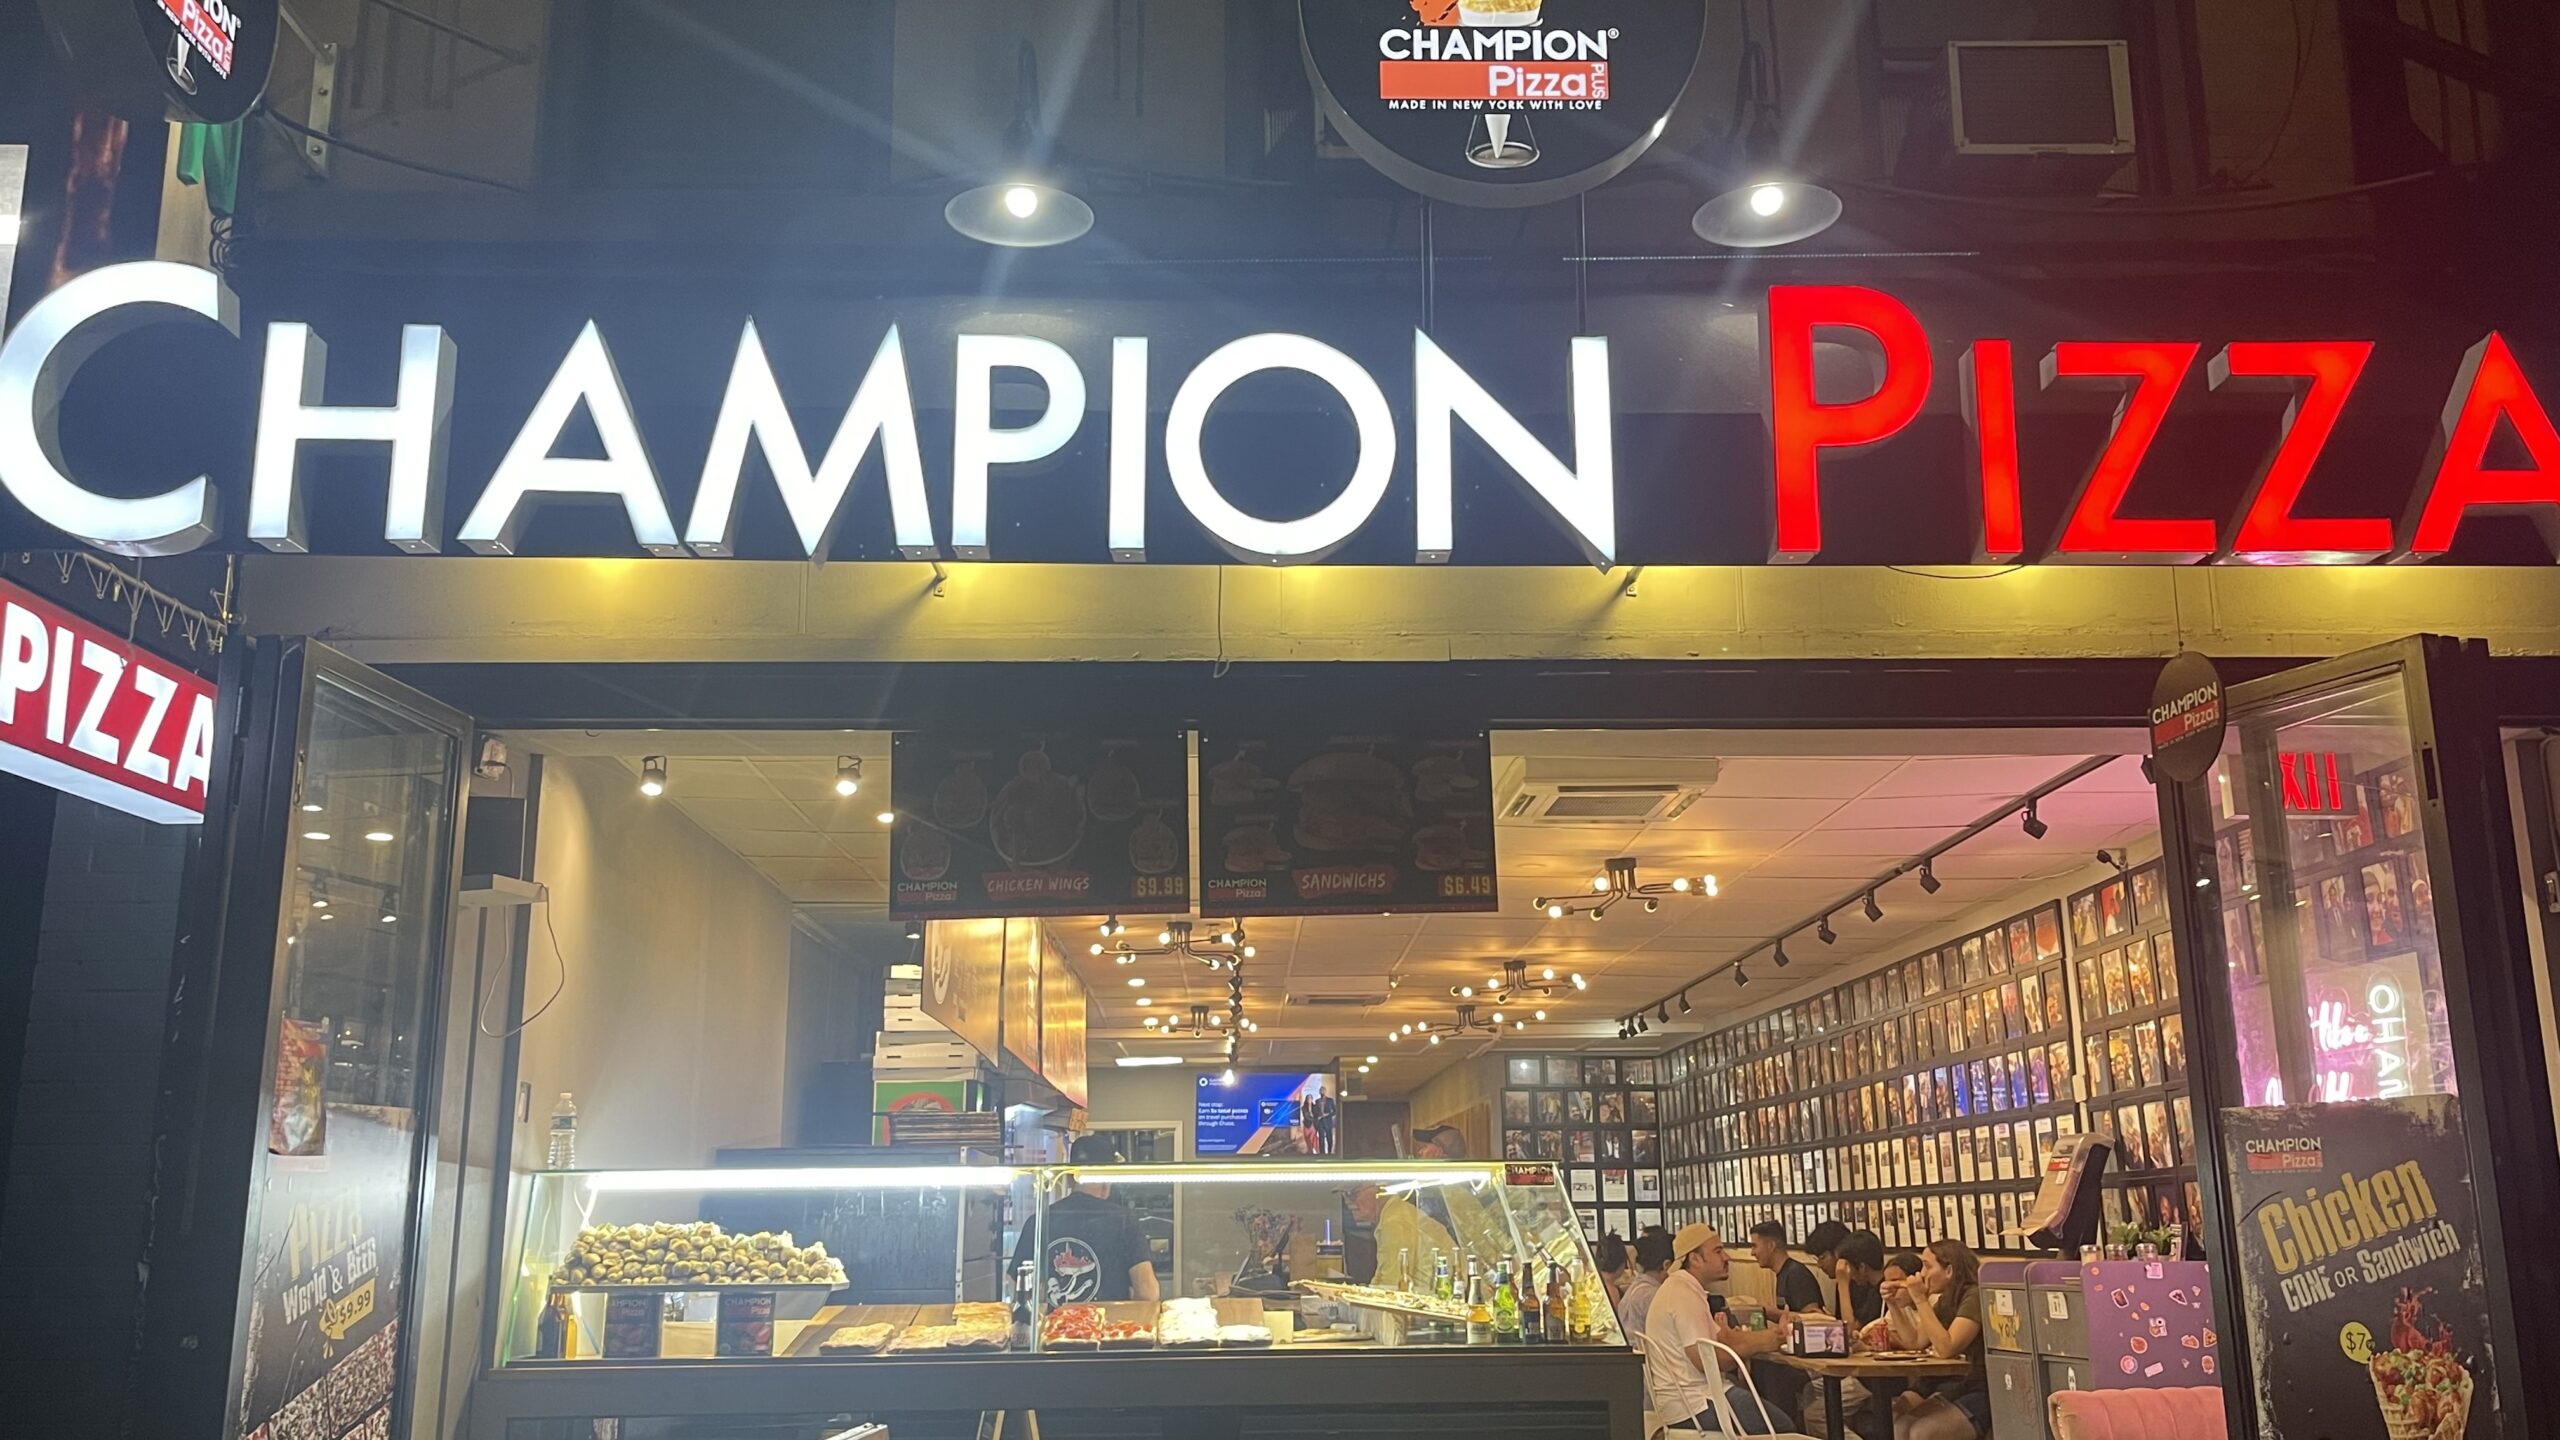 NYC’s Champion Pizza Expands with New Locations – Champion Pizza